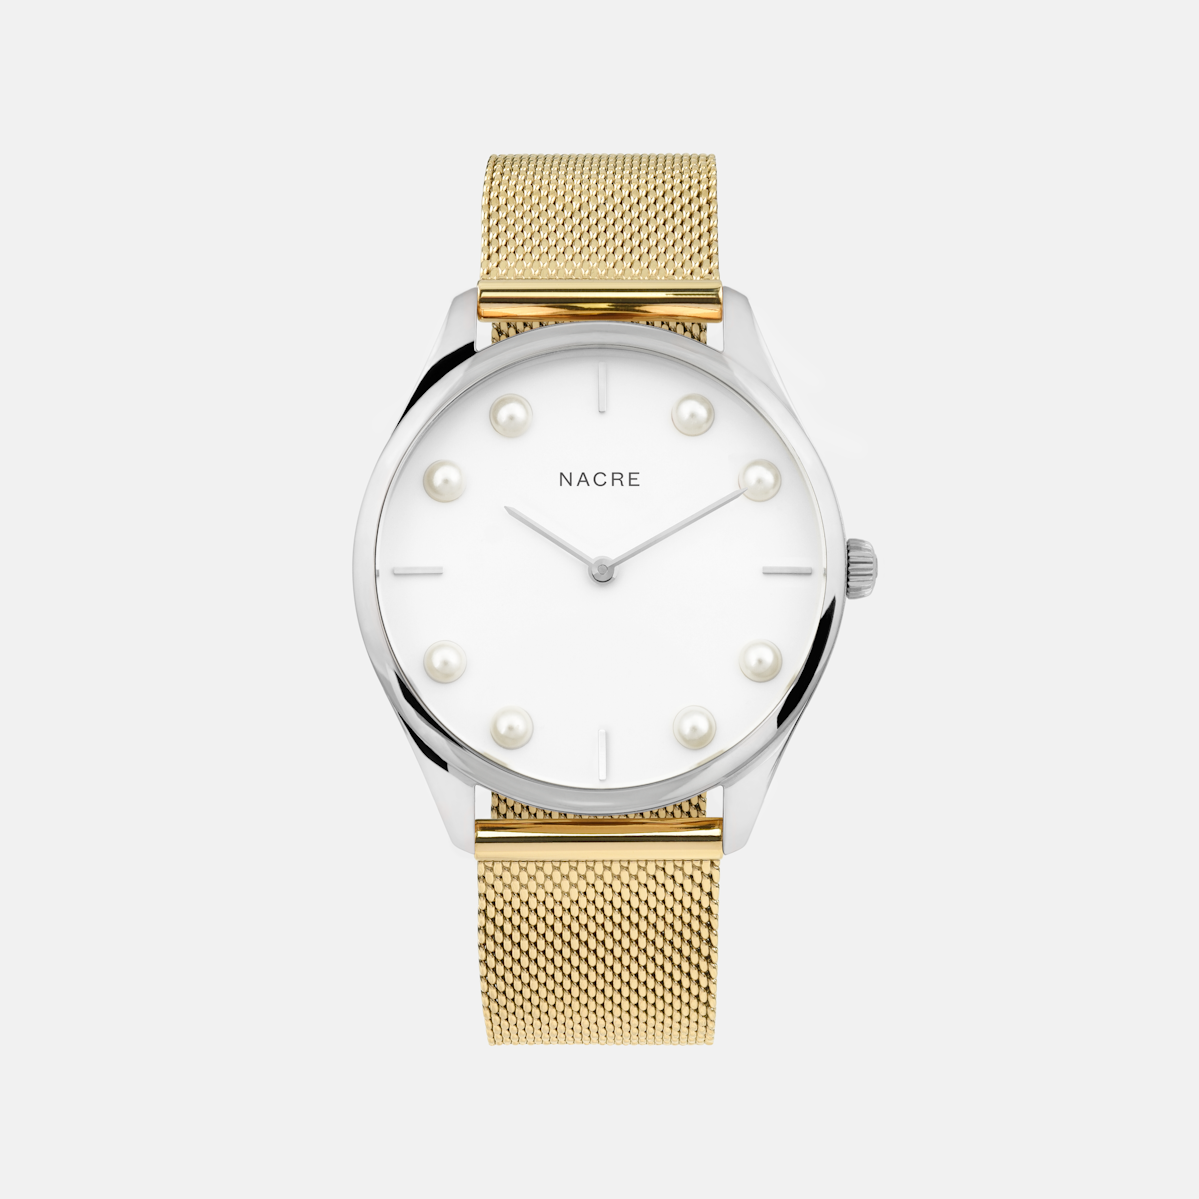 Lune 8 - Stainless Steel - Natural Leather